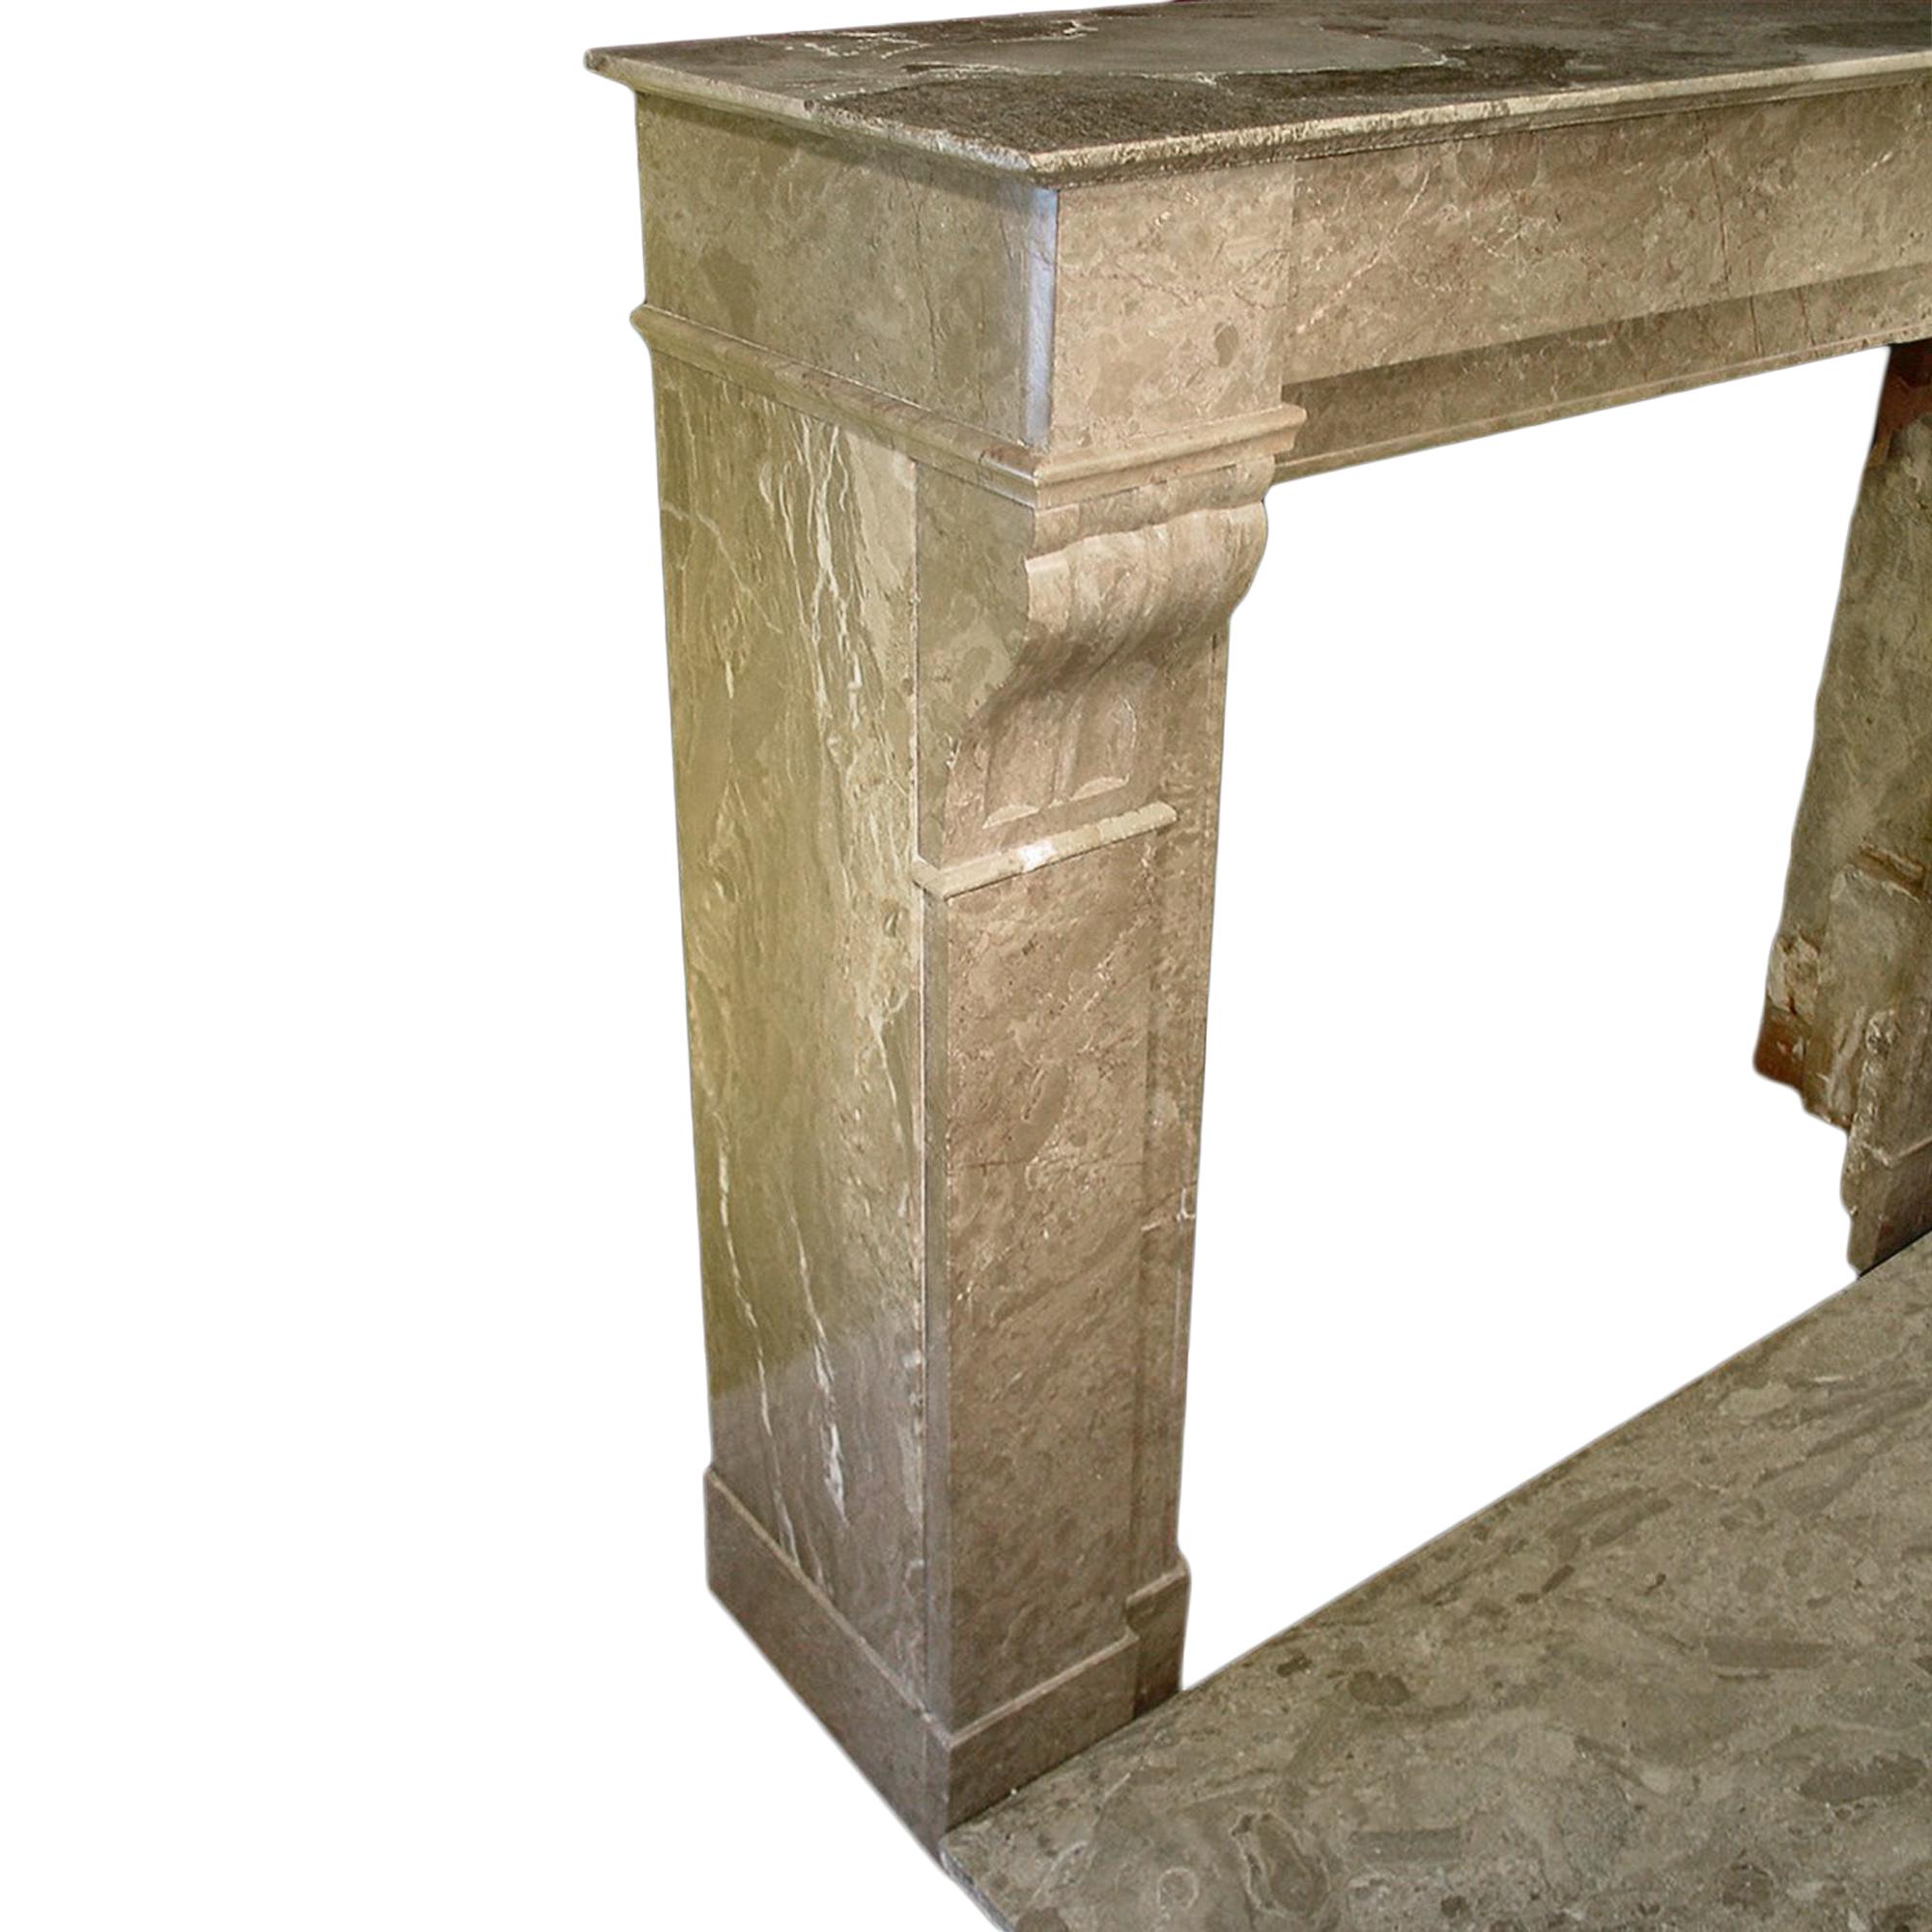 A wonderful French architectural marble fireplace mantel. The mantel legs are decorated with carved mouldings of fluted scrolls. The marble is in brown and off white veins. The top has a rectangular shelf. The mantel comes with its original marble